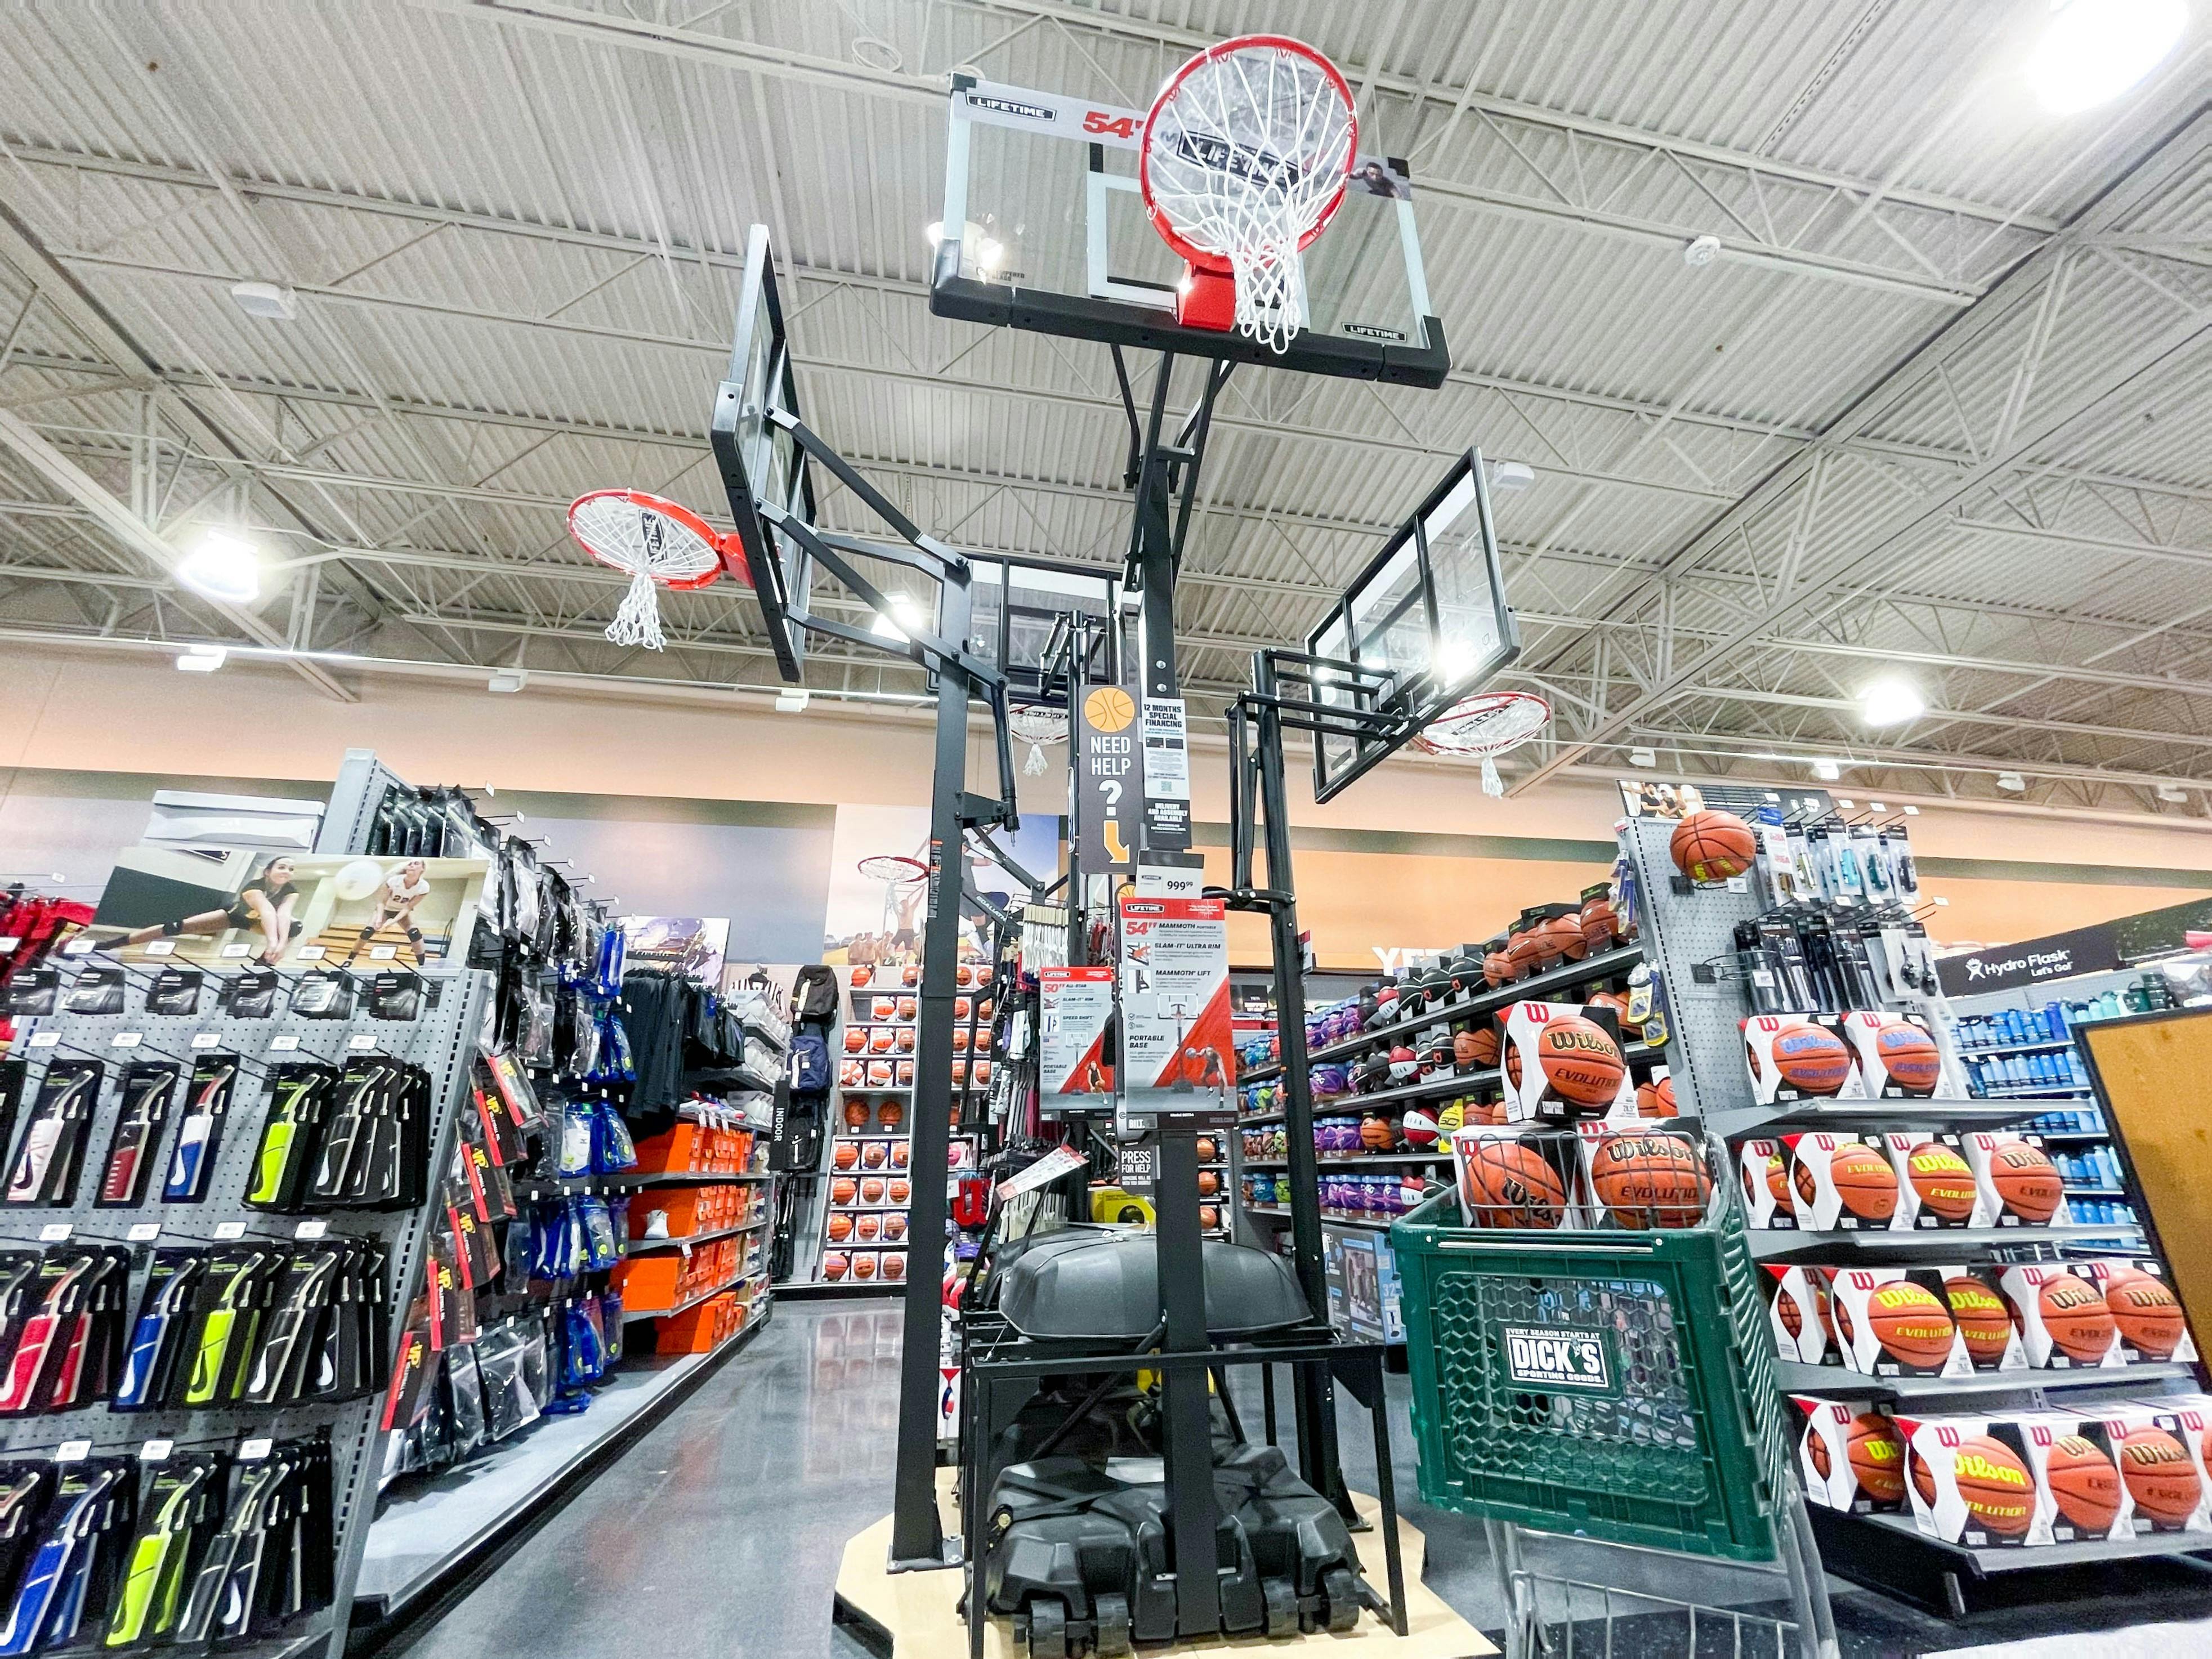 Mini Basketball Hoops  Curbside Pickup Available at DICK'S